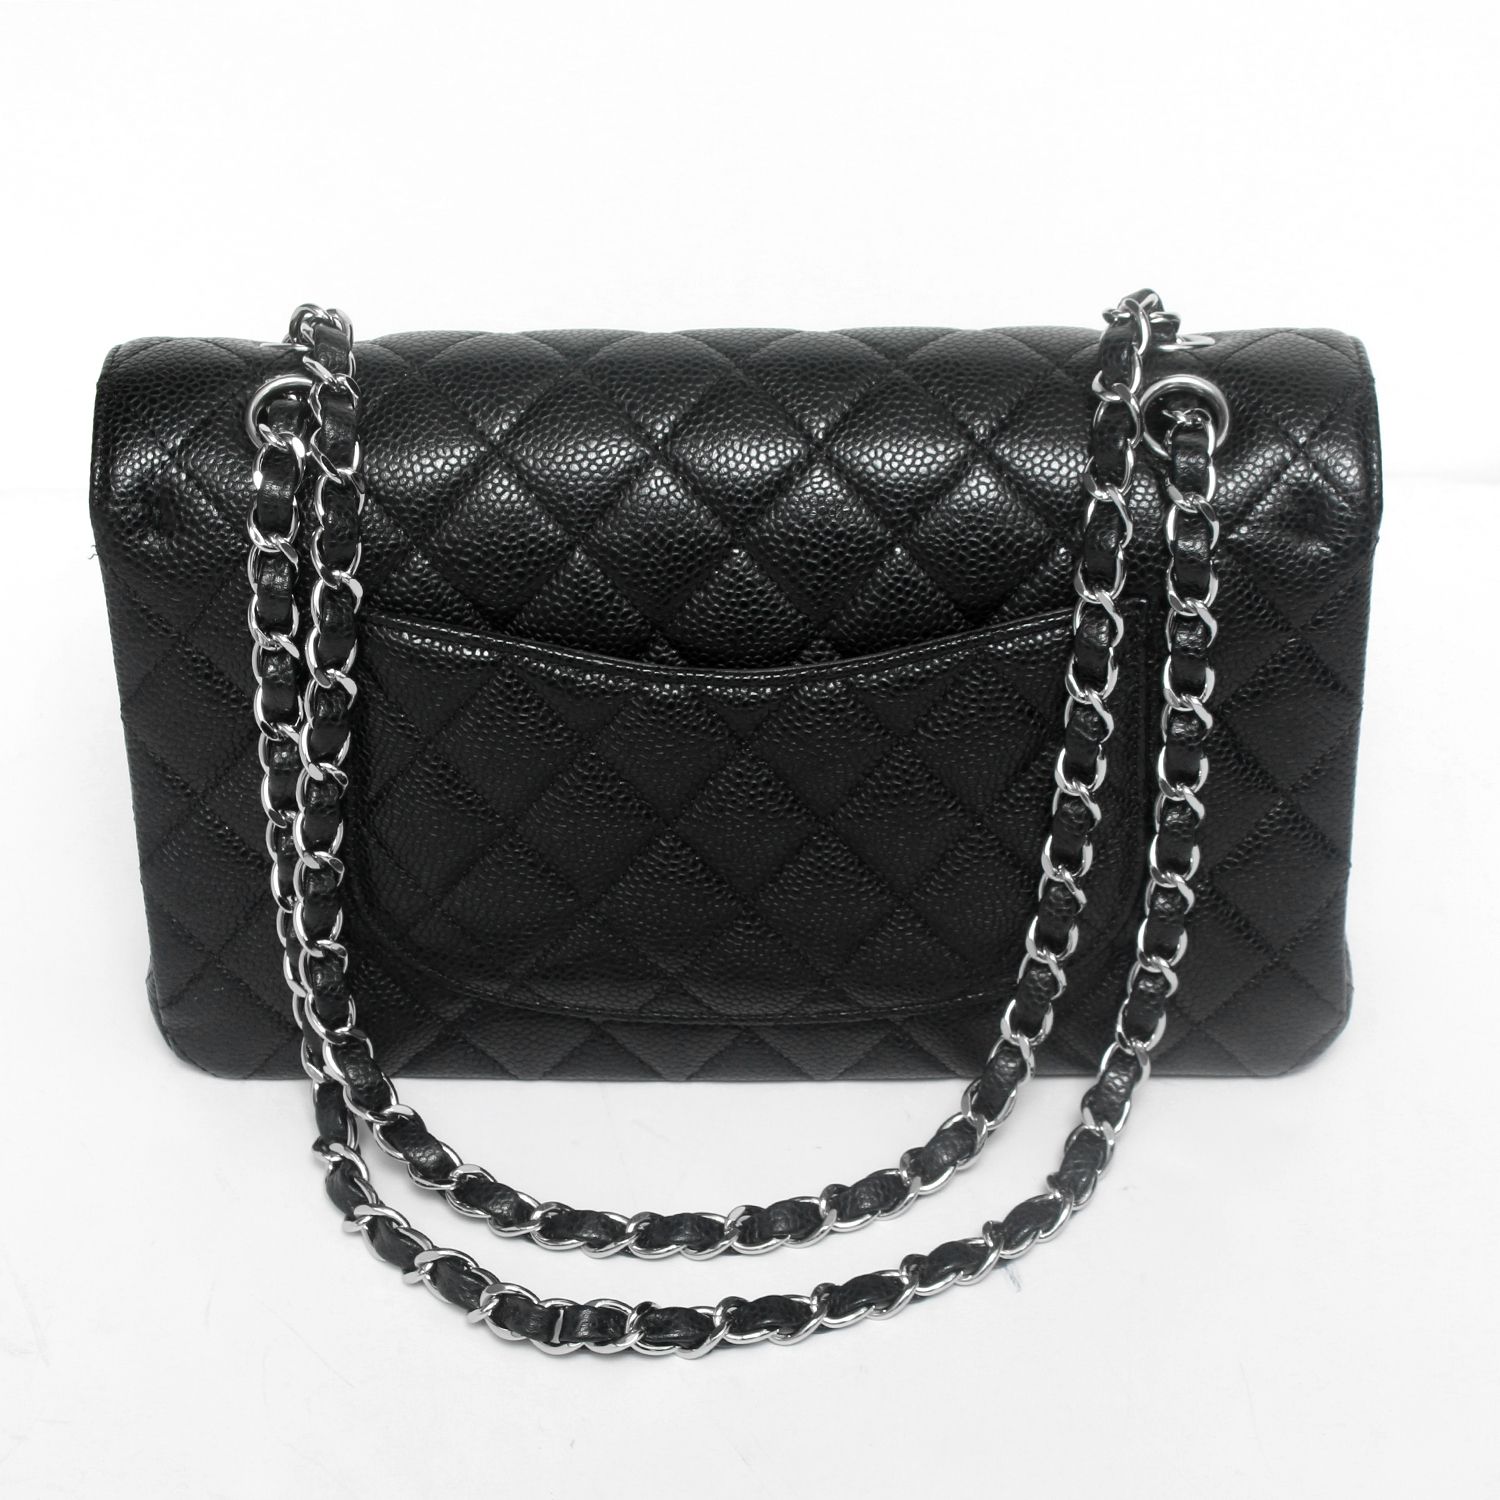 Chanel Black Quilted Caviar Leather Medium Classic Double Flap Bag Chanel